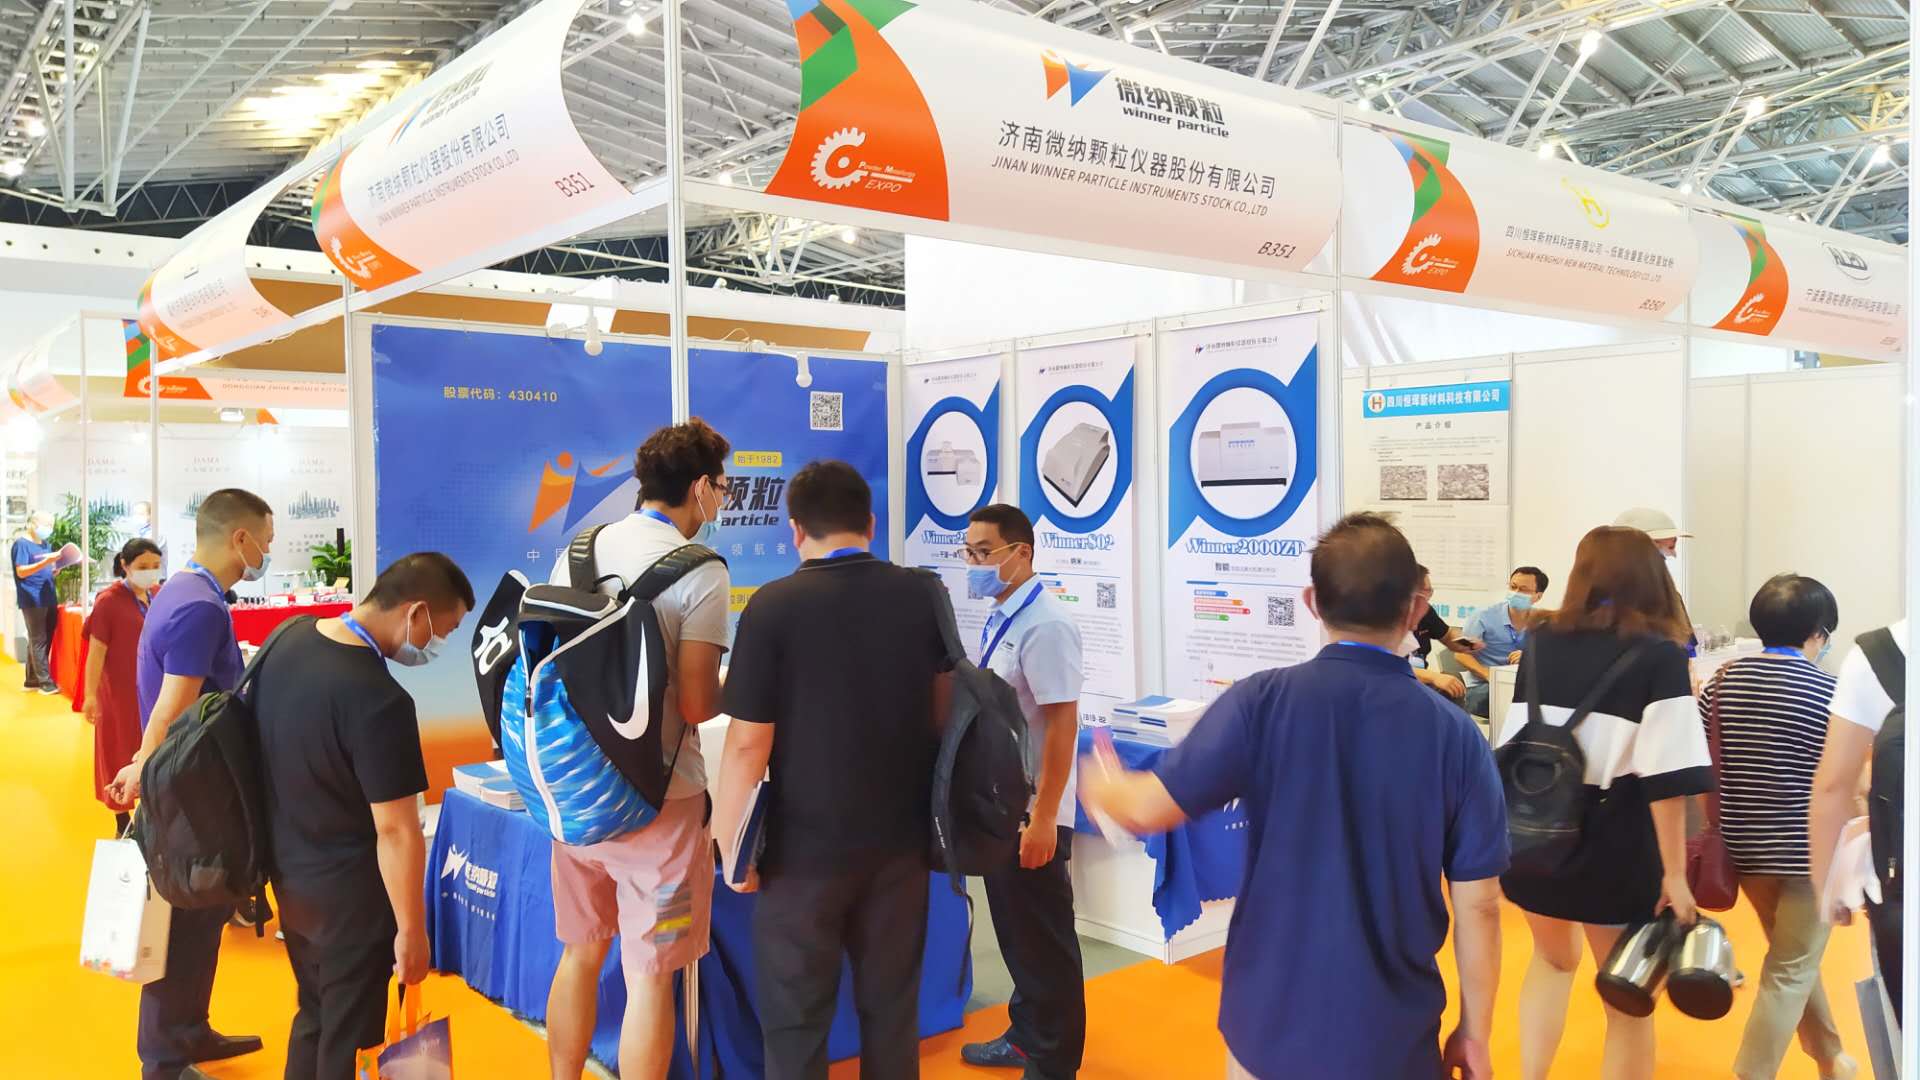 The 13th Shanghai International Exhibition of powder metallurgy, cemented carbide and advanced ceramics